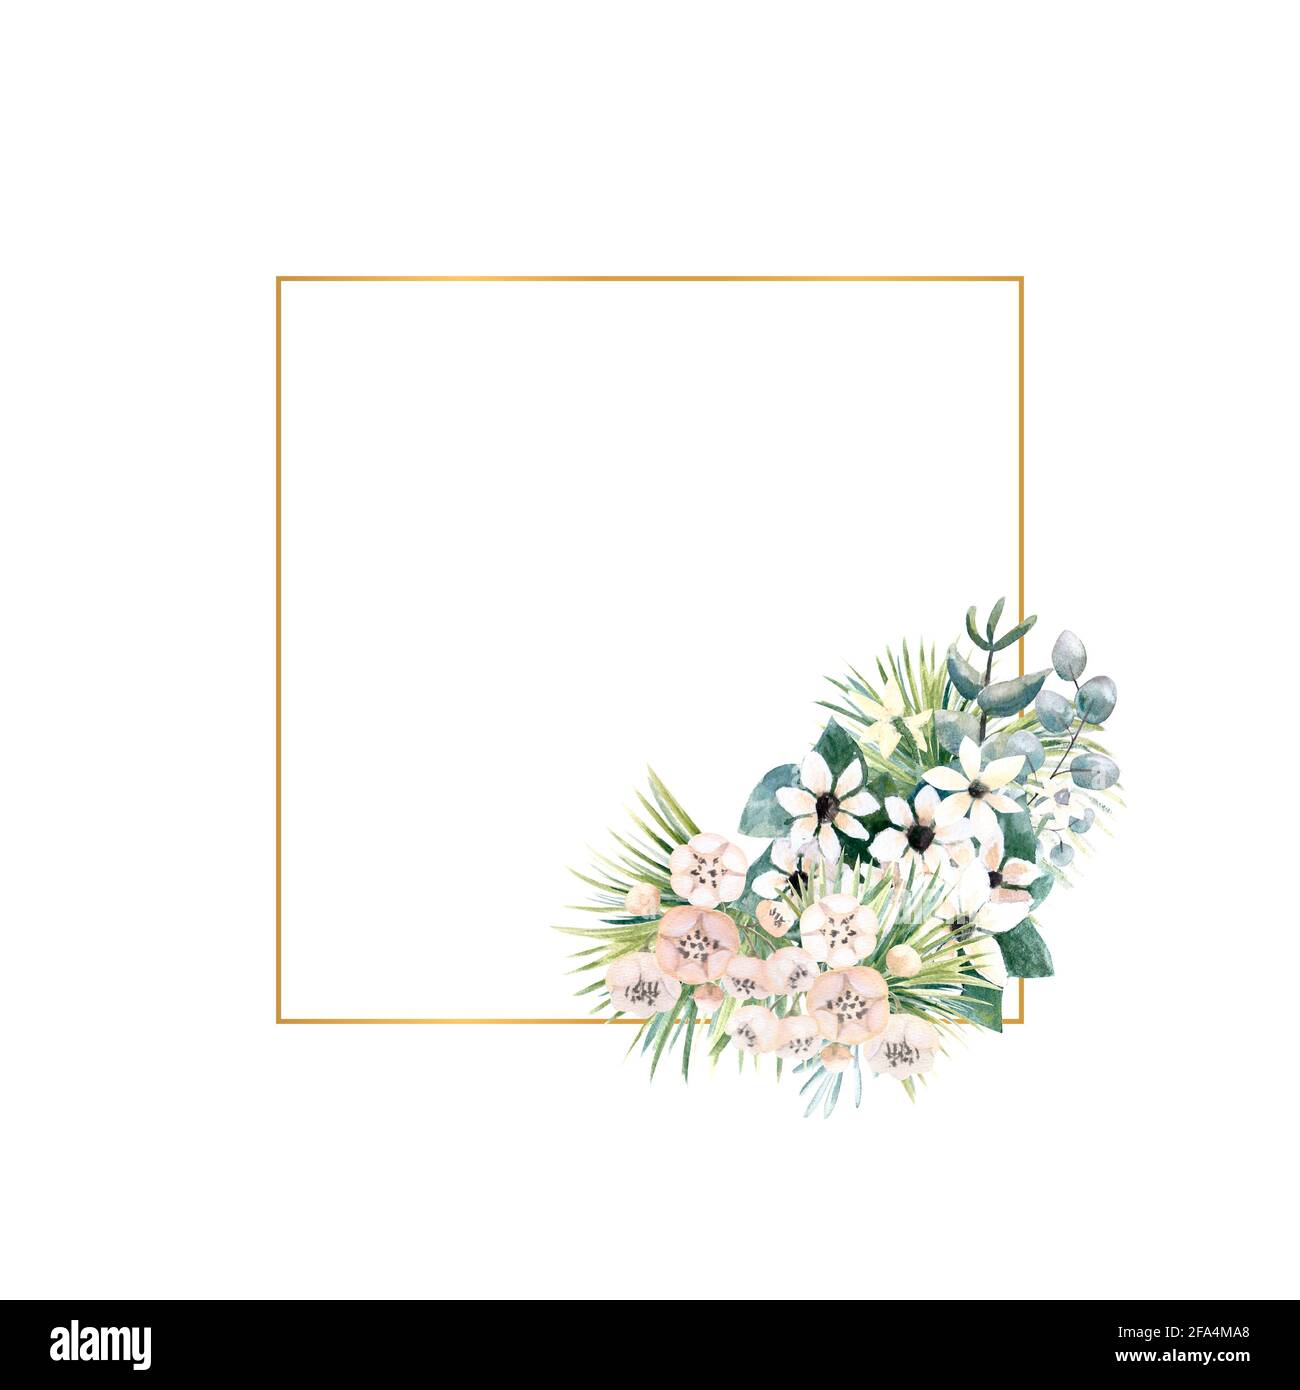 Square gold frame with small flowers of actinidia, bouvardia, tropical and palm leaves. Wedding bouquet in a frame for the design of a stylish Stock Photo